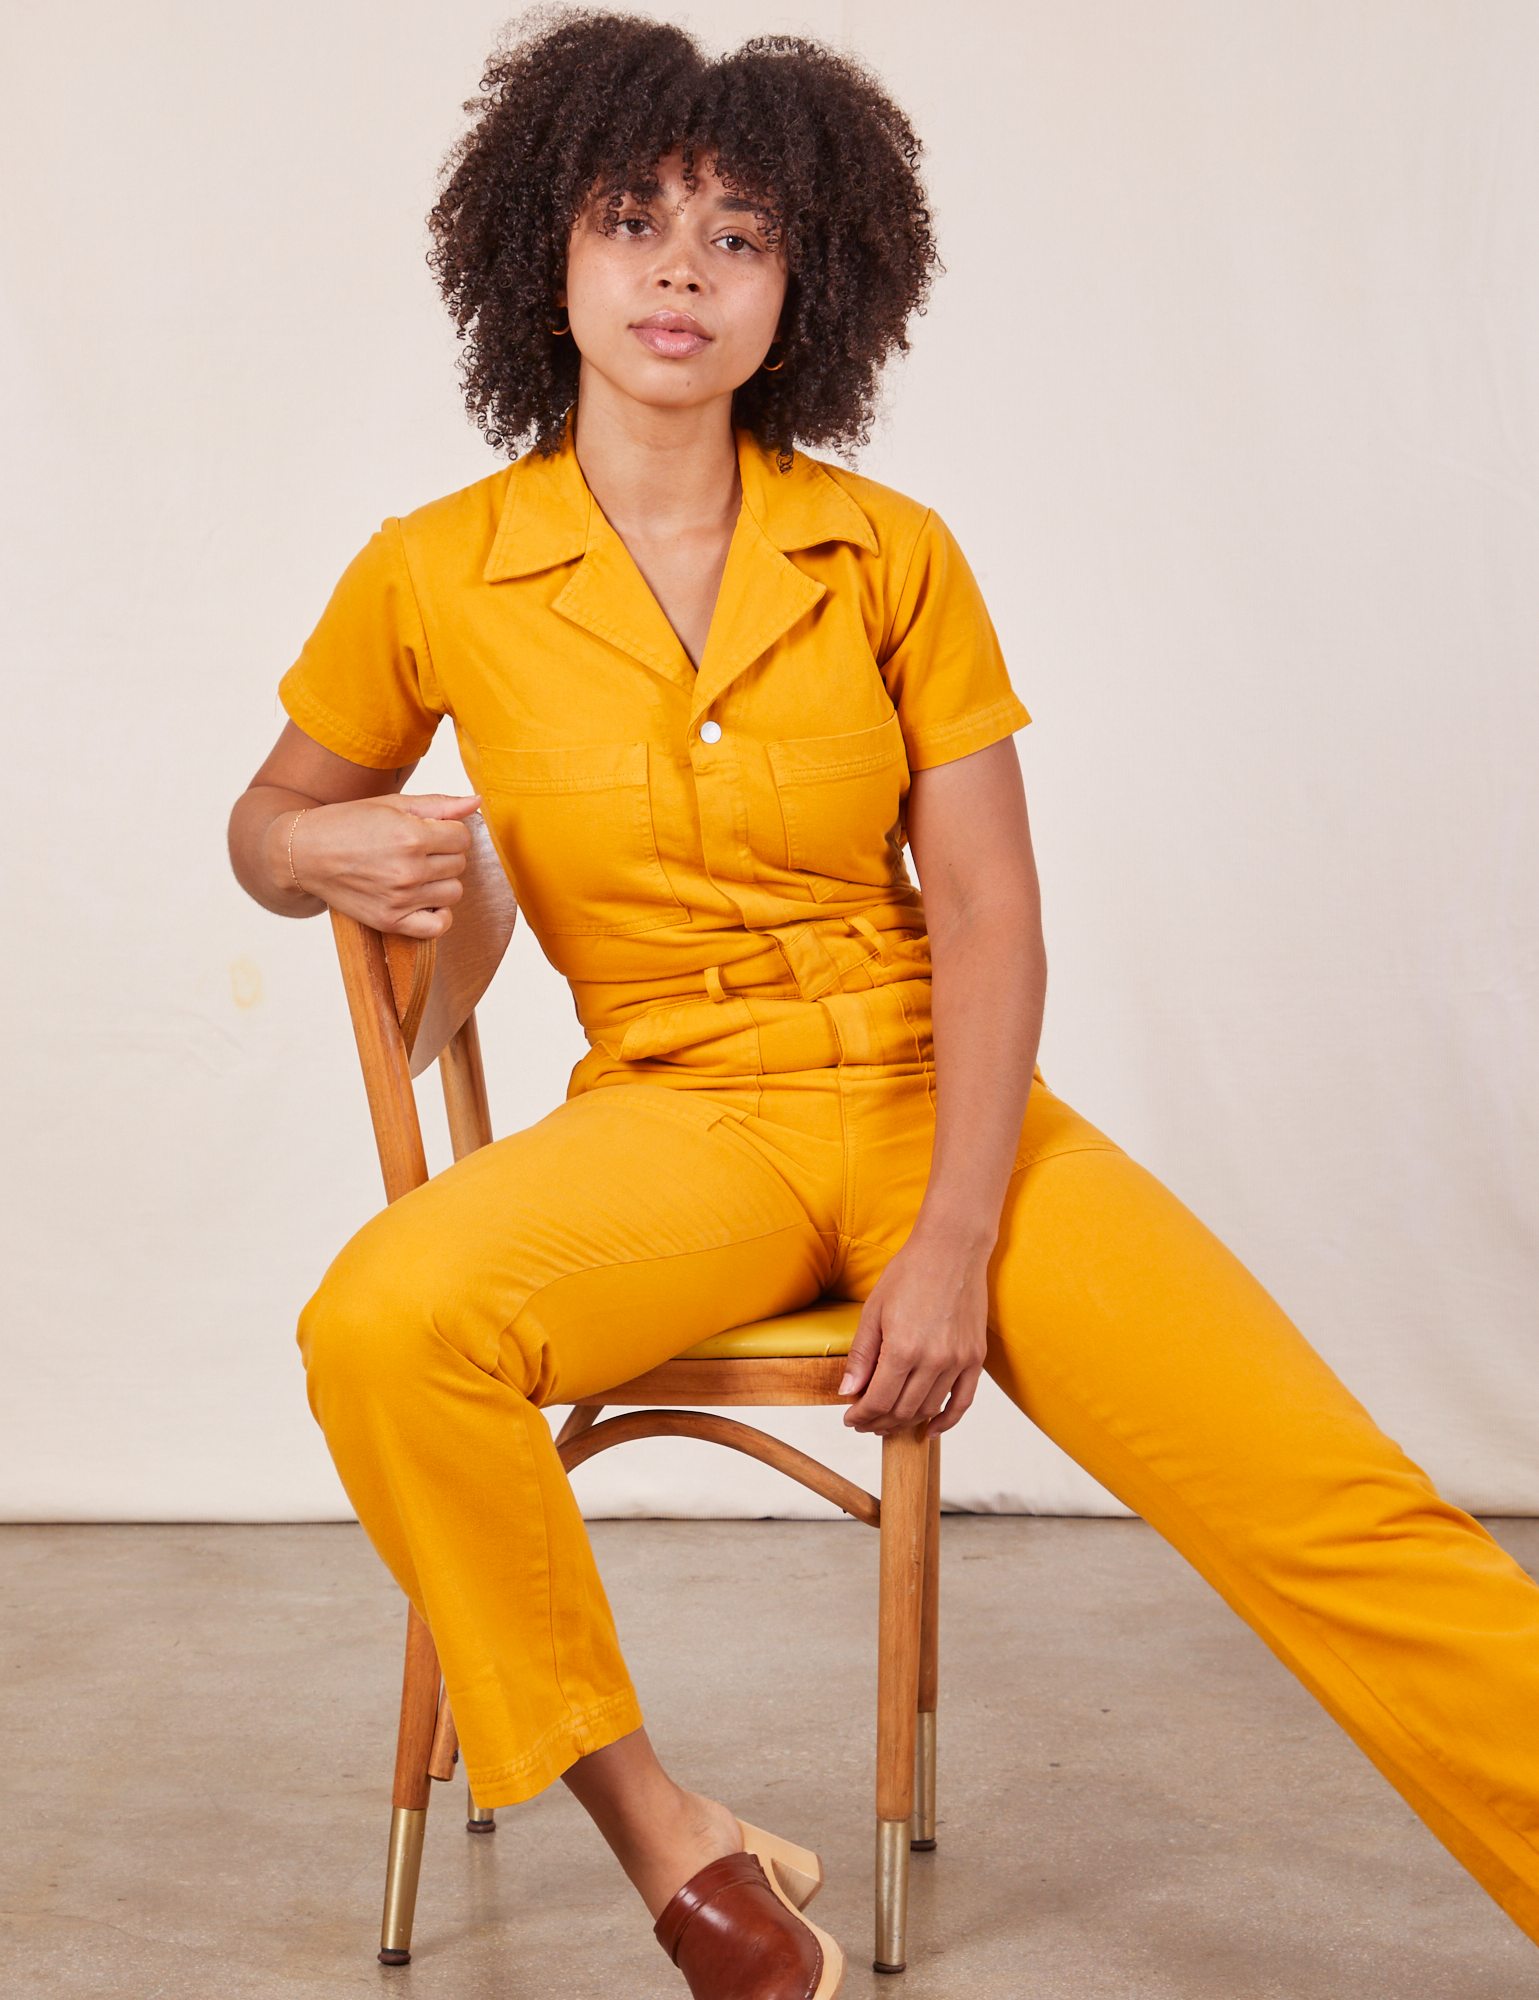 Gabi is sitting in a chair wearing Short Sleeve Jumpsuit in Mustard Yellow